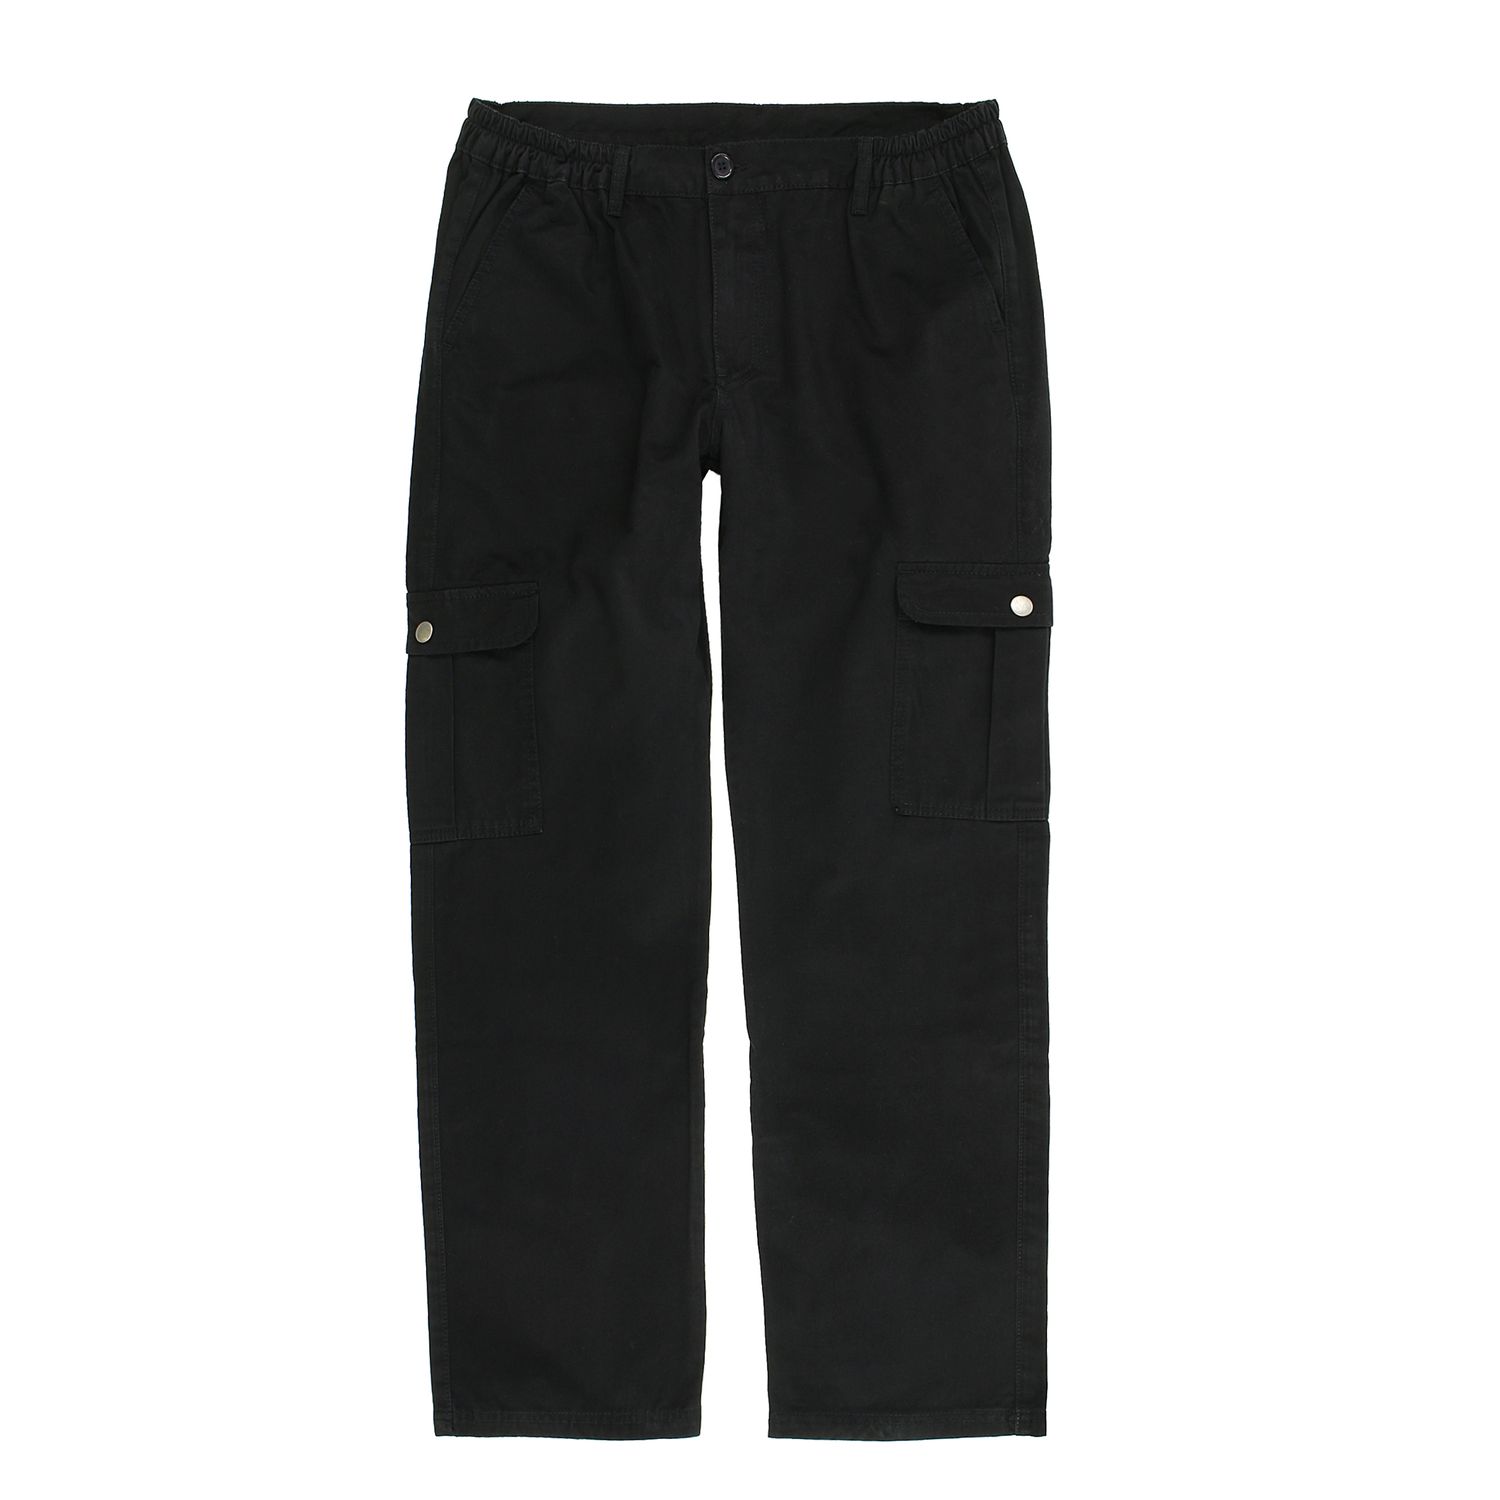 Cargo pants black by Abraxas in plus sizes up to 12XL